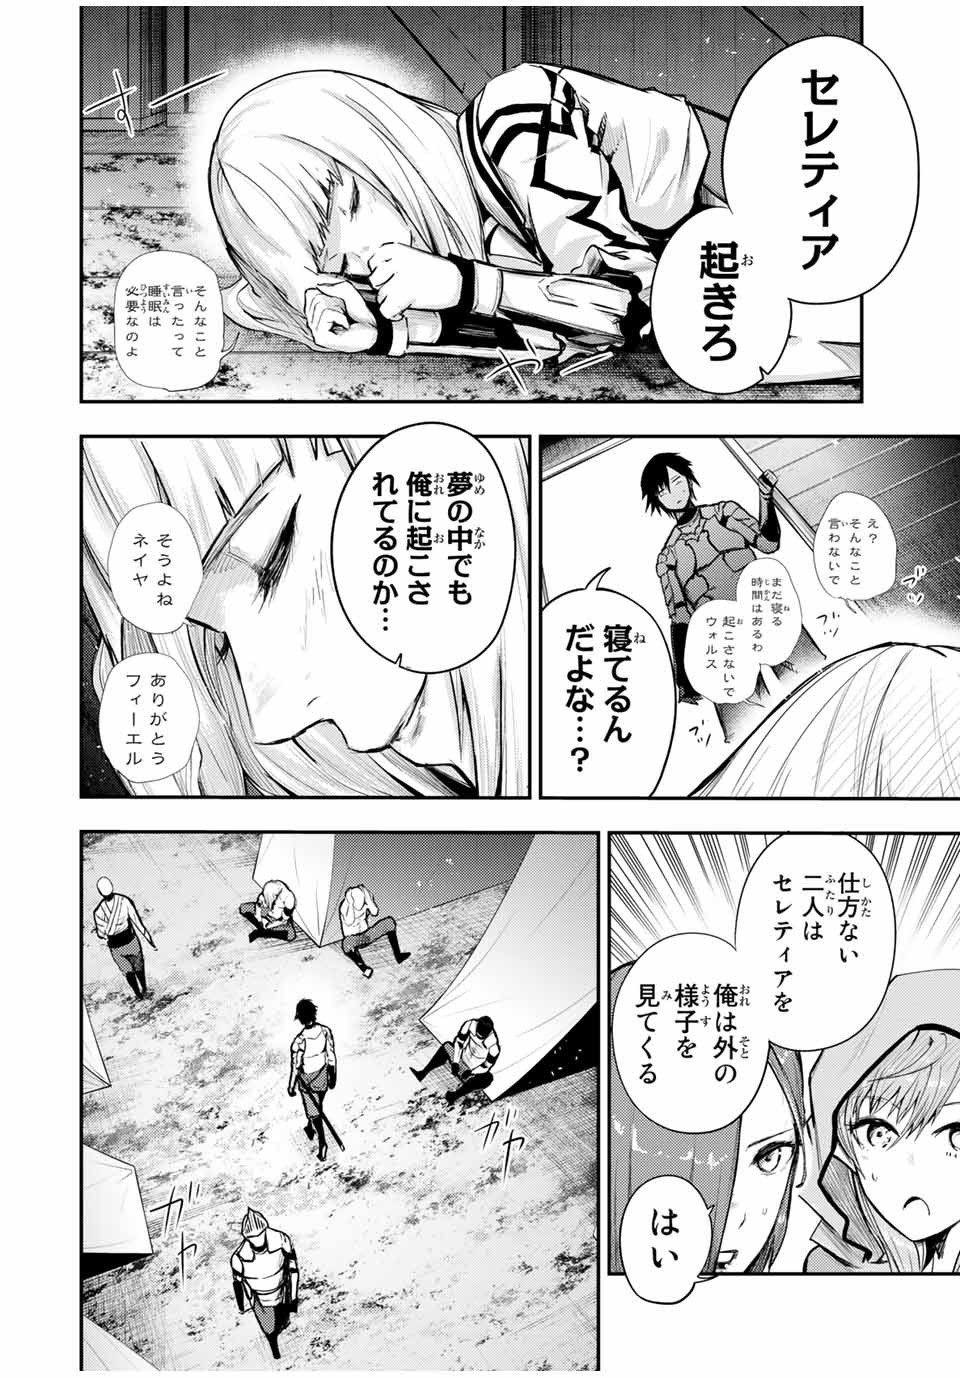 the strongest former prince-; 奴隷転生 ～その奴隷、最強の元王子につき～ 第27話 - Page 8